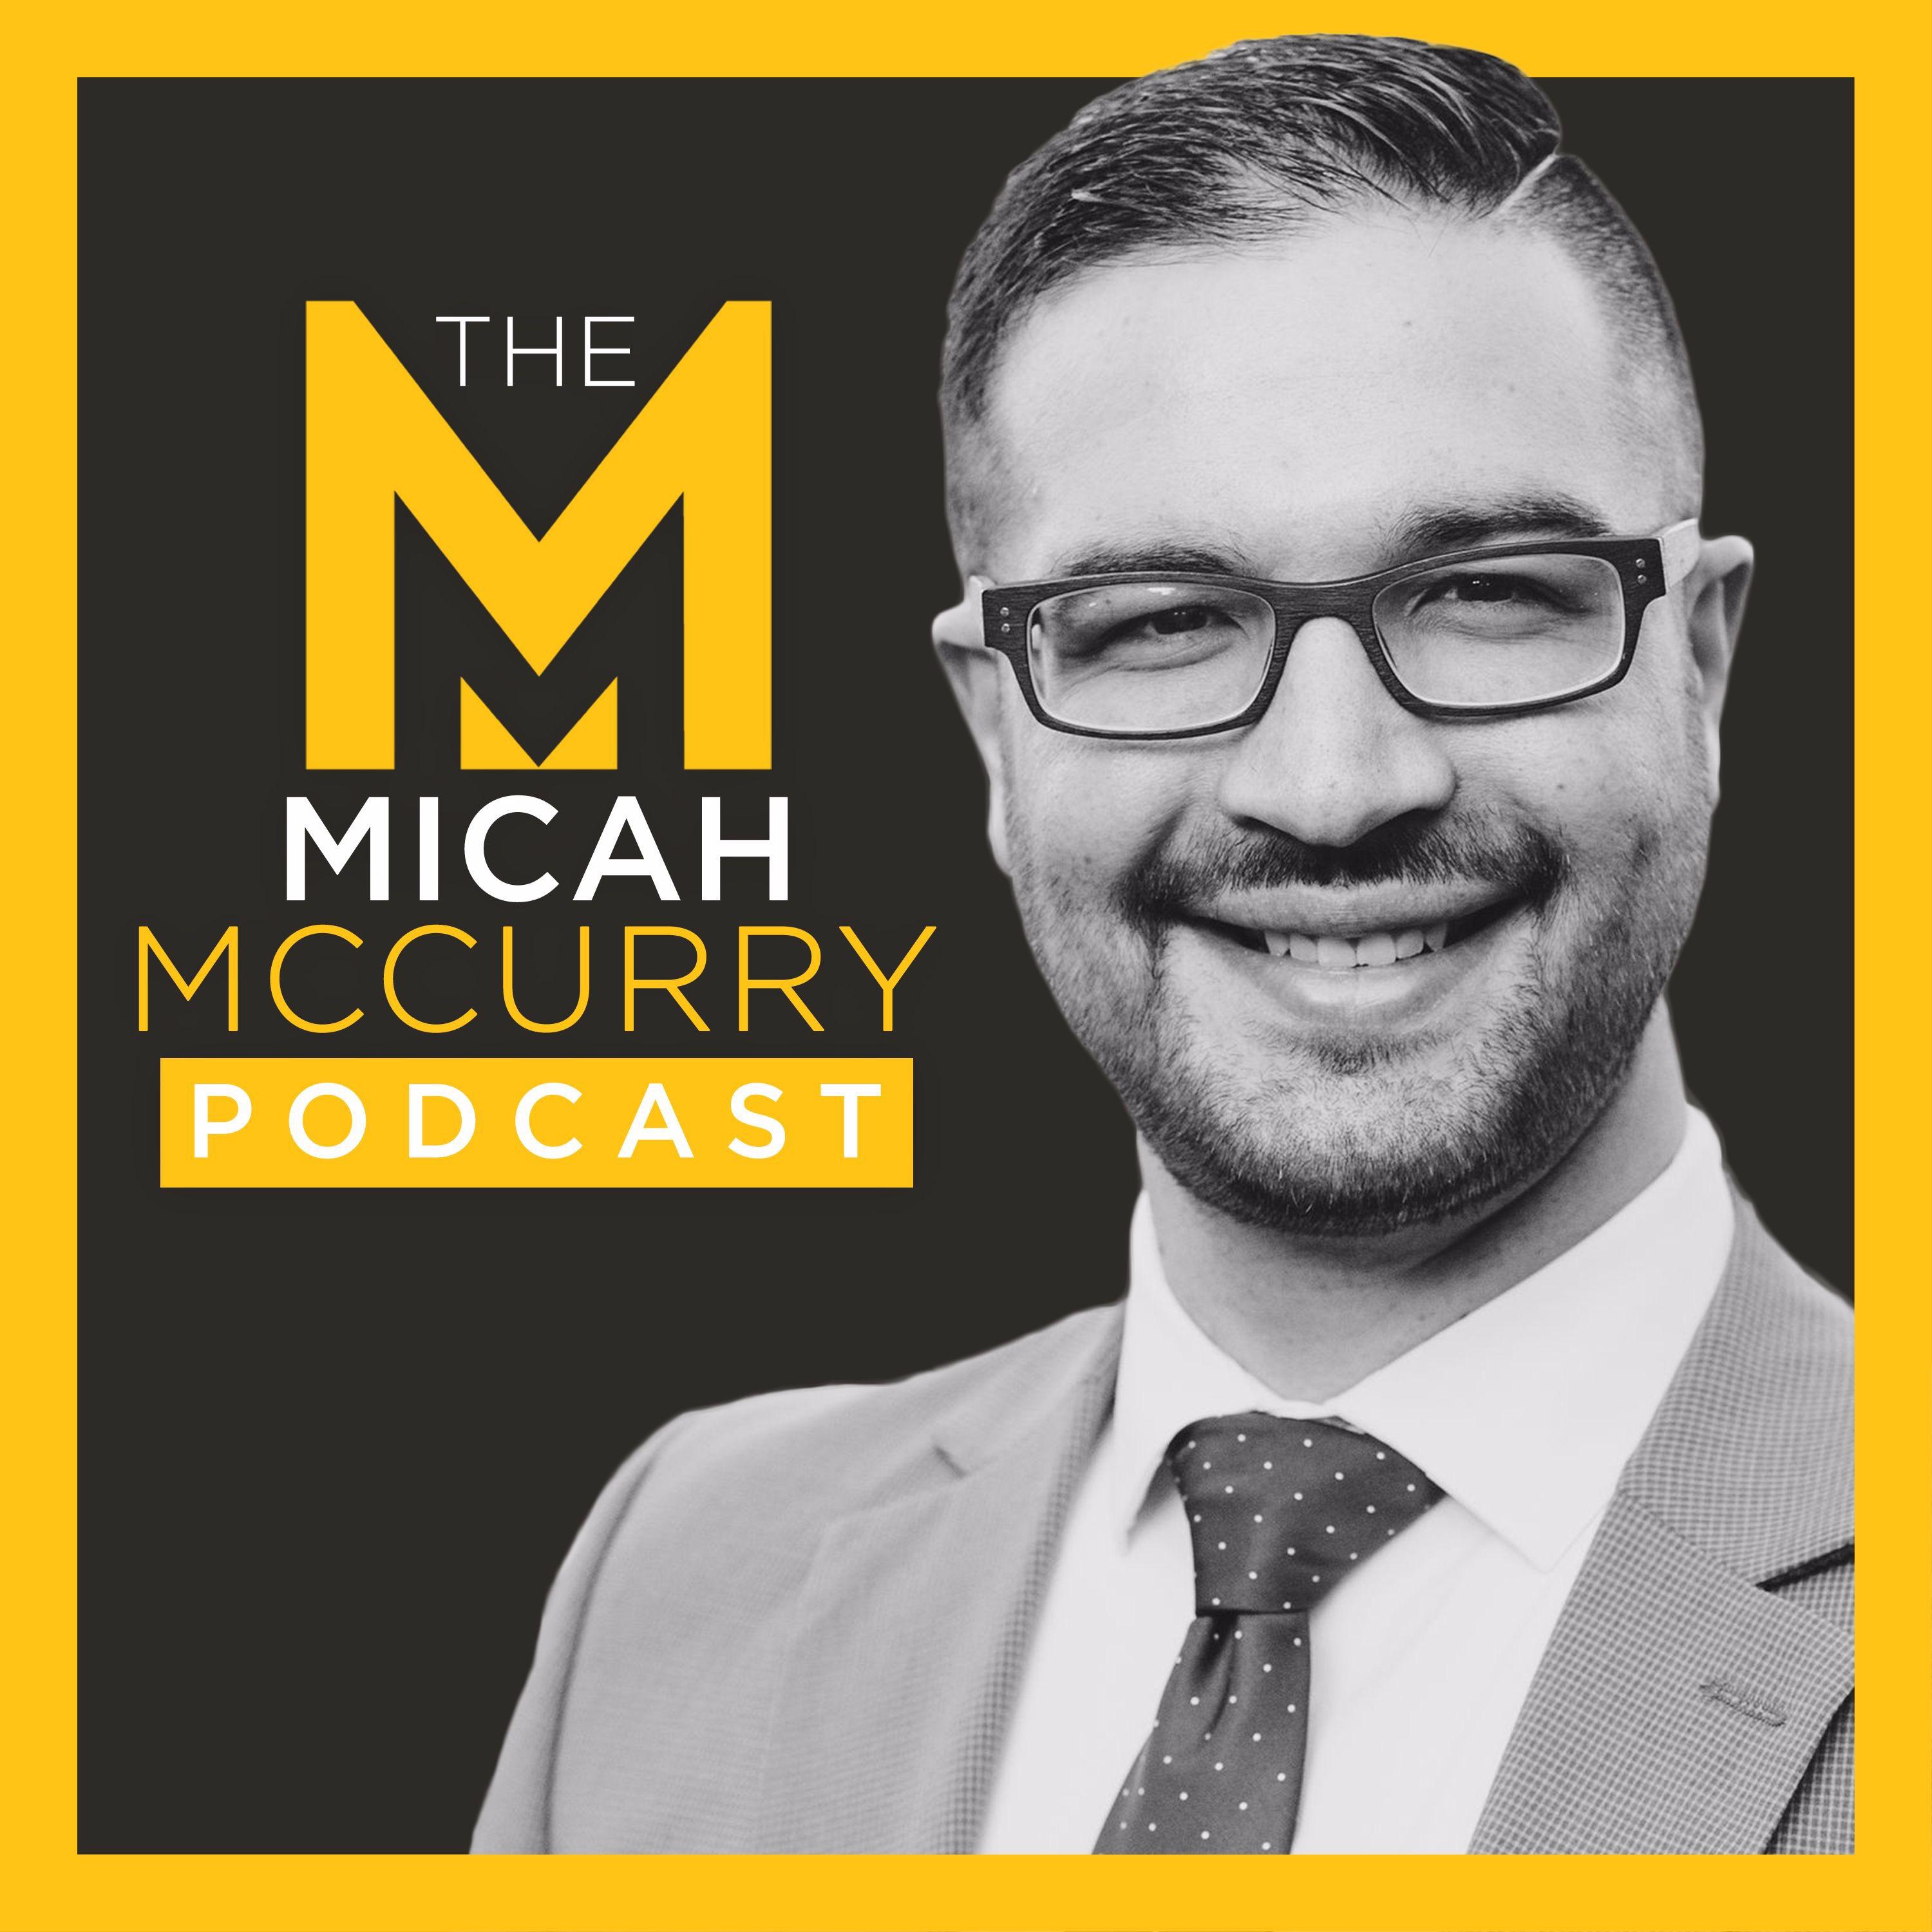 The Micah McCurry Podcast